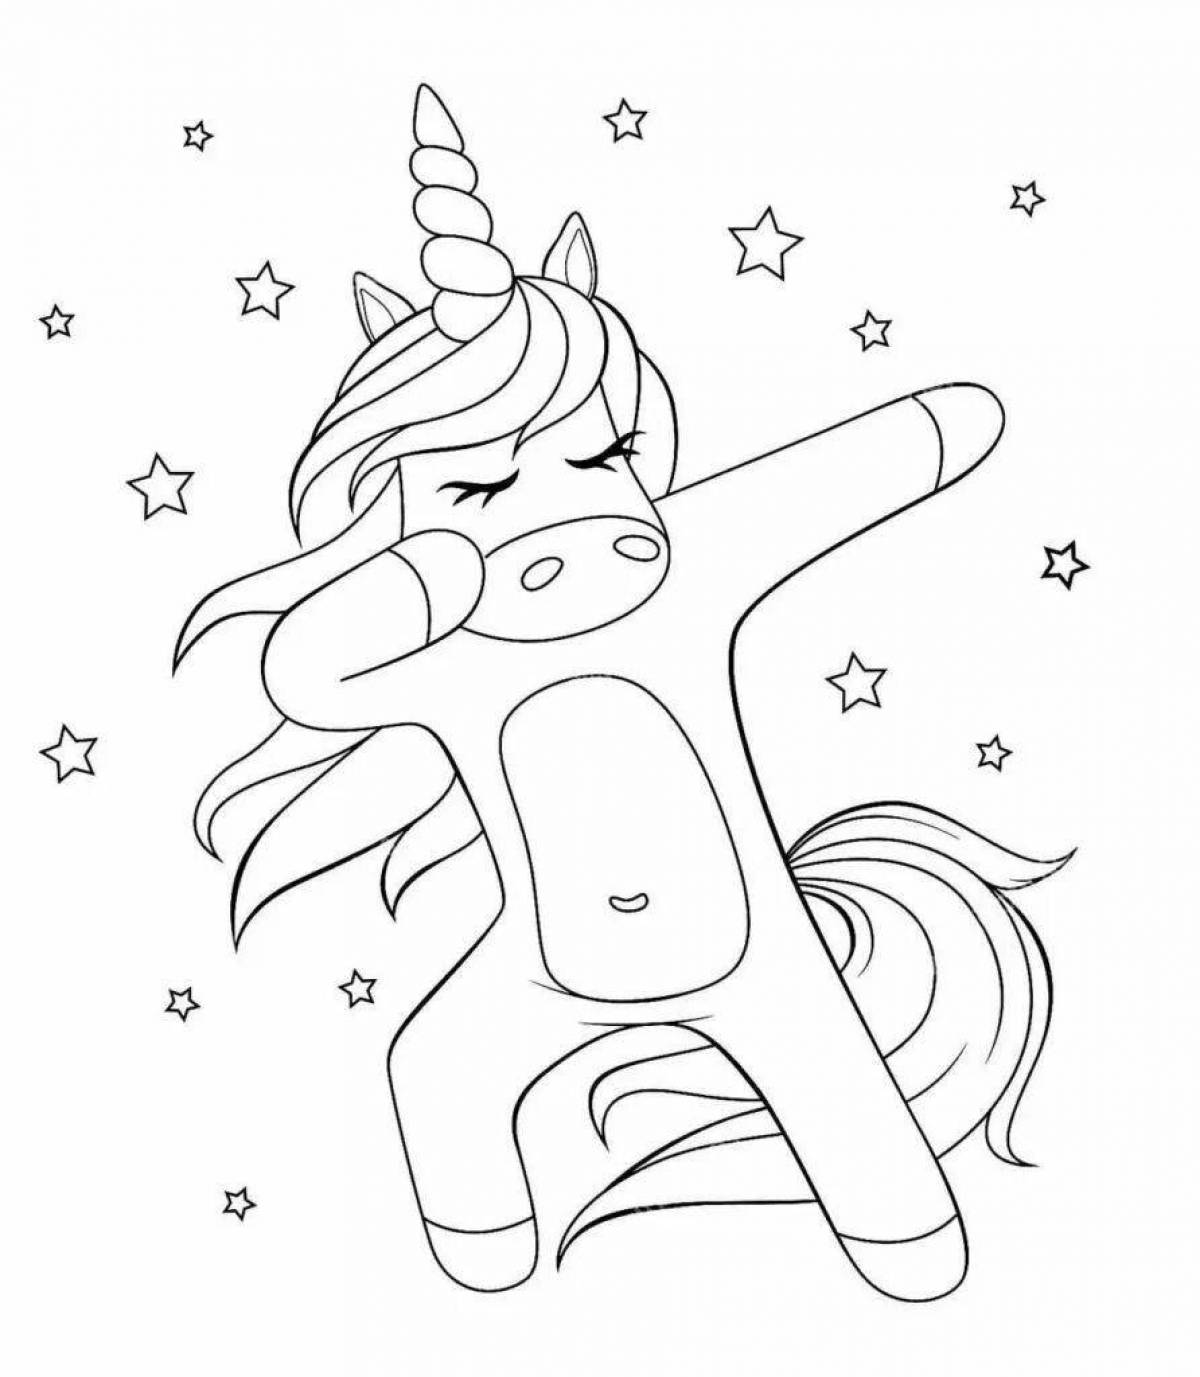 Amazing coloring book of a girl dressed as a unicorn